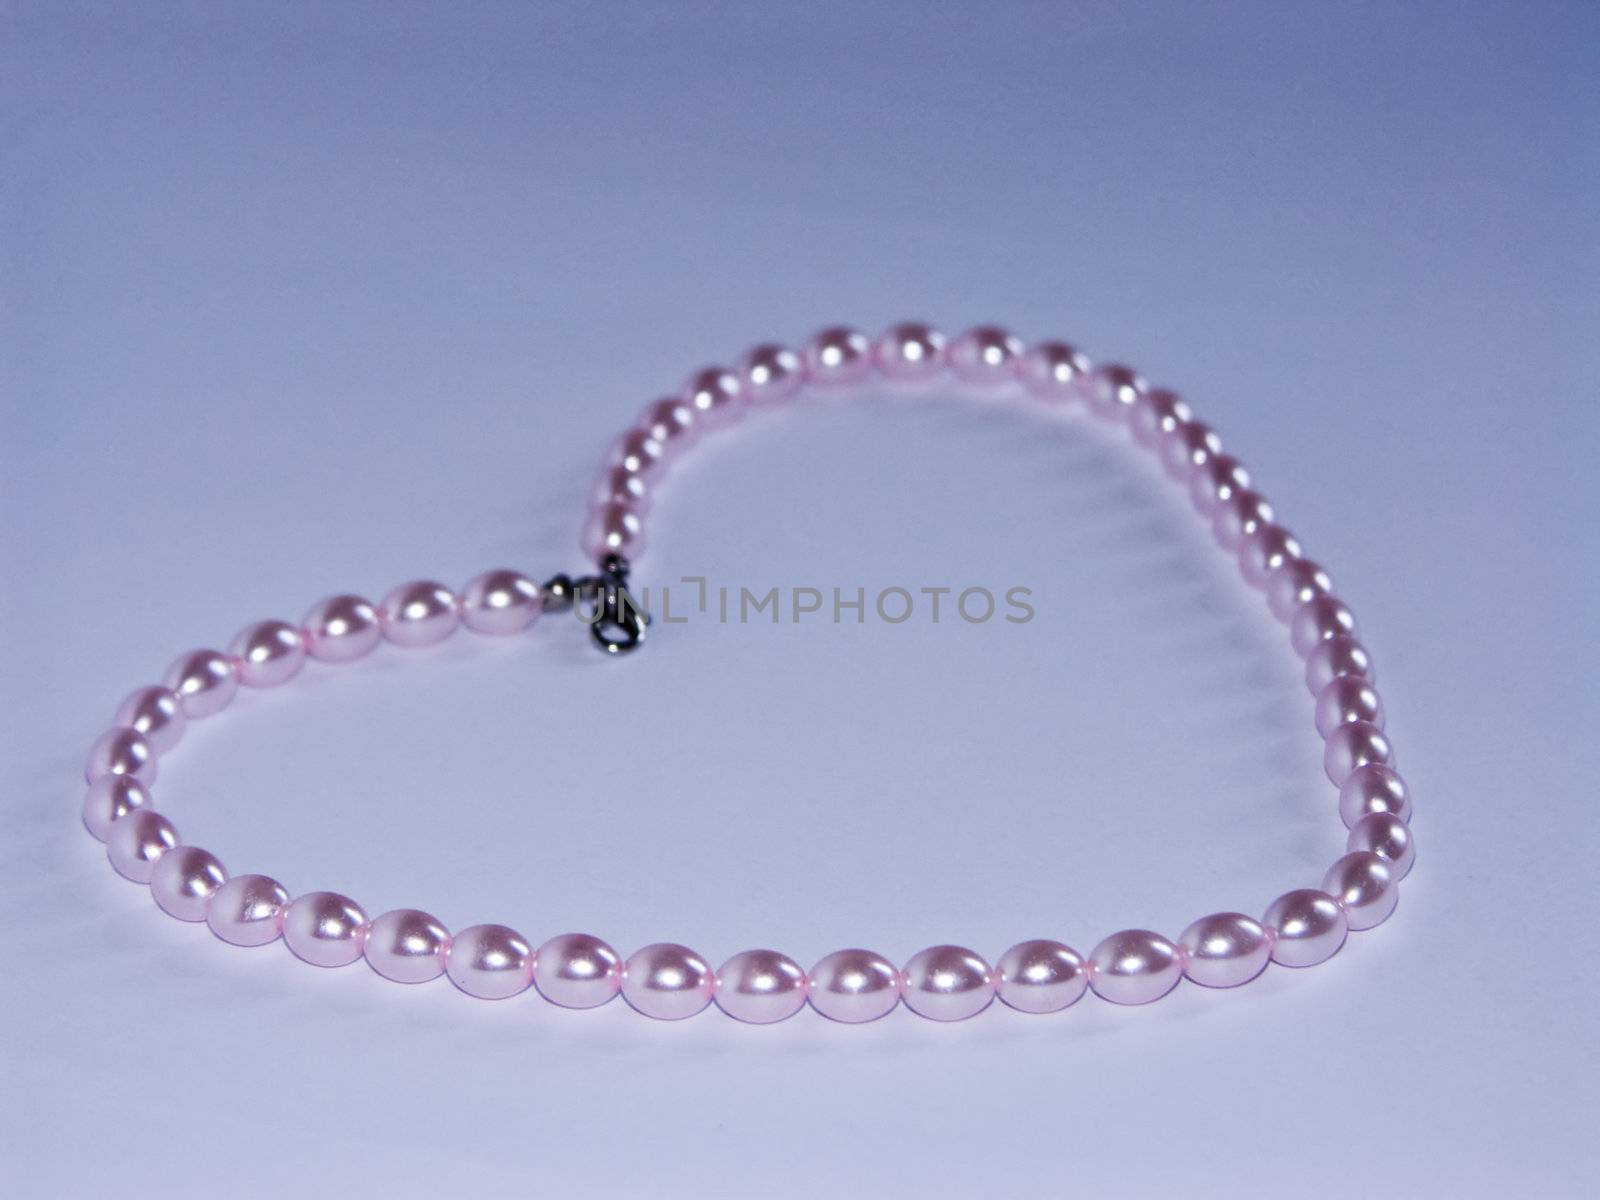 The image of the pearl beads combined in the form of heart